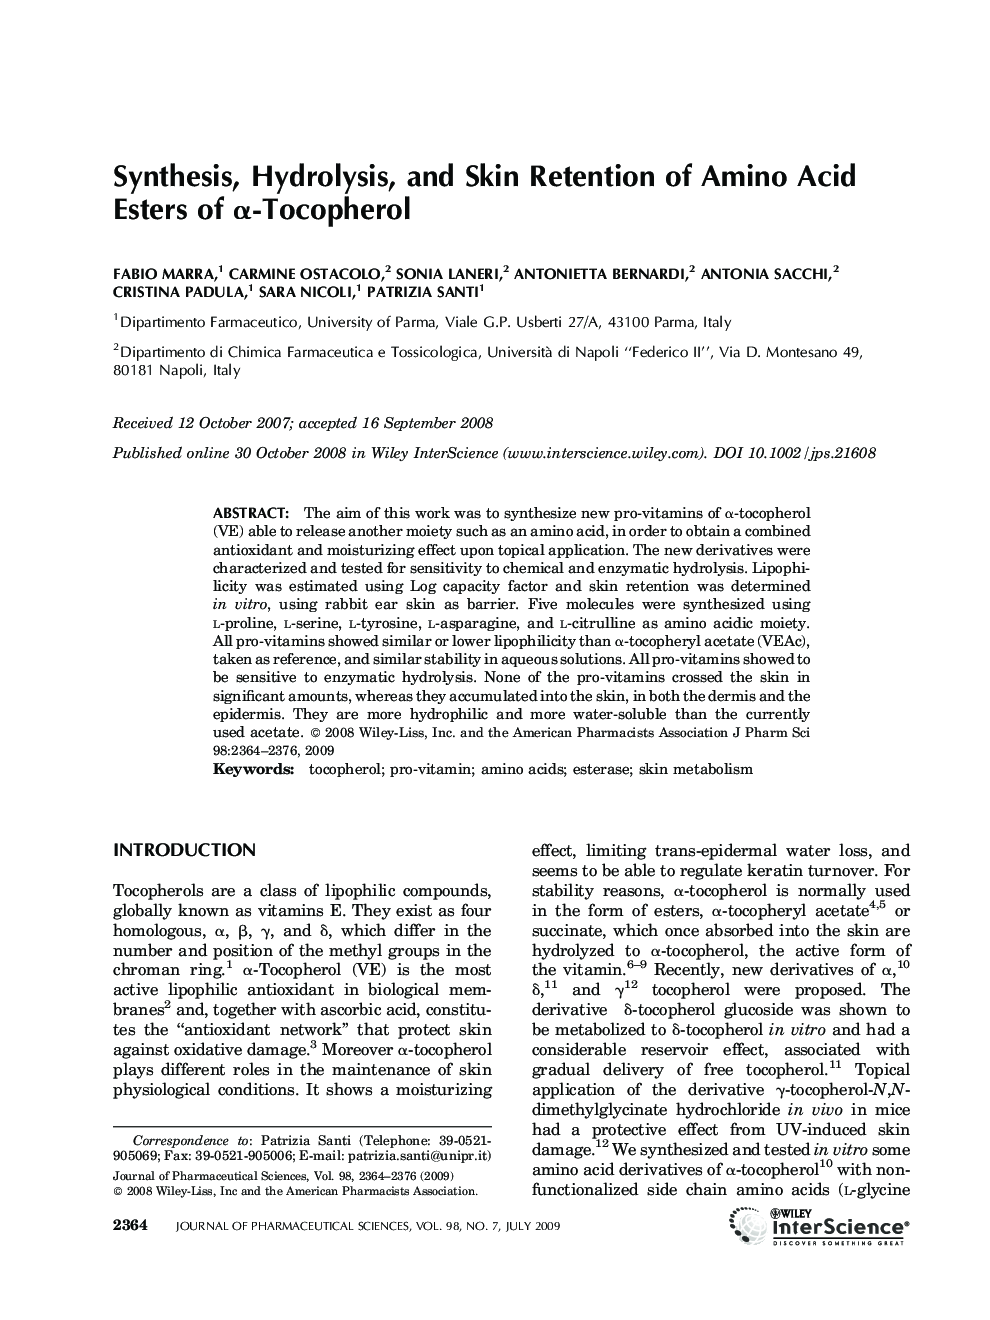 Synthesis, hydrolysis, and skin retention of amino acid esters of Î±-tocopherol